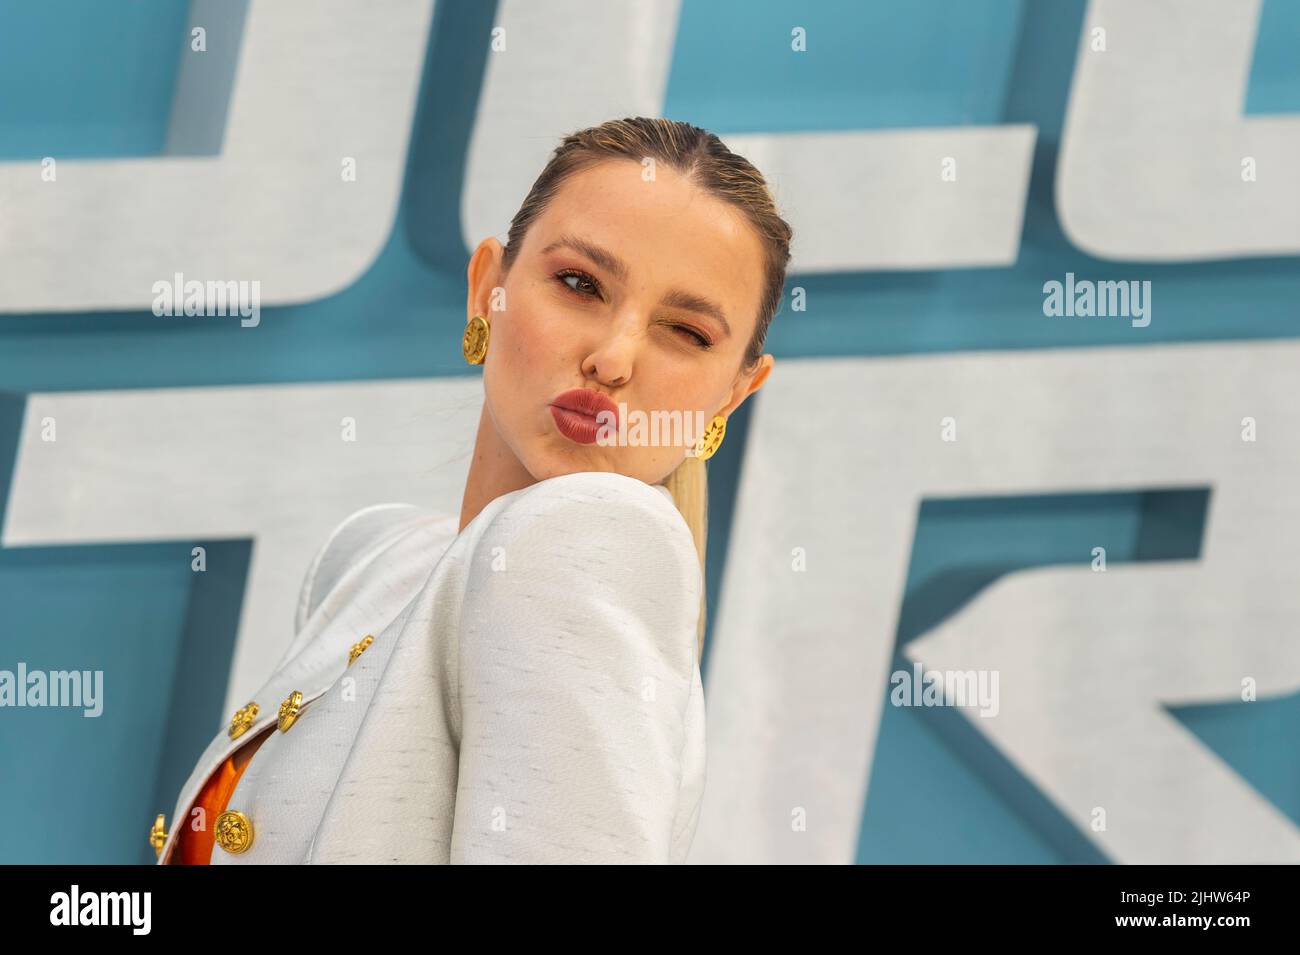 London, UK. 20 July 2022. Sophie Hermann attends the UK gala screening of the movie ‘Bullet Train’ at Cineworld Leicester Square.  Credit: Stephen Chung / Alamy Live News Stock Photo